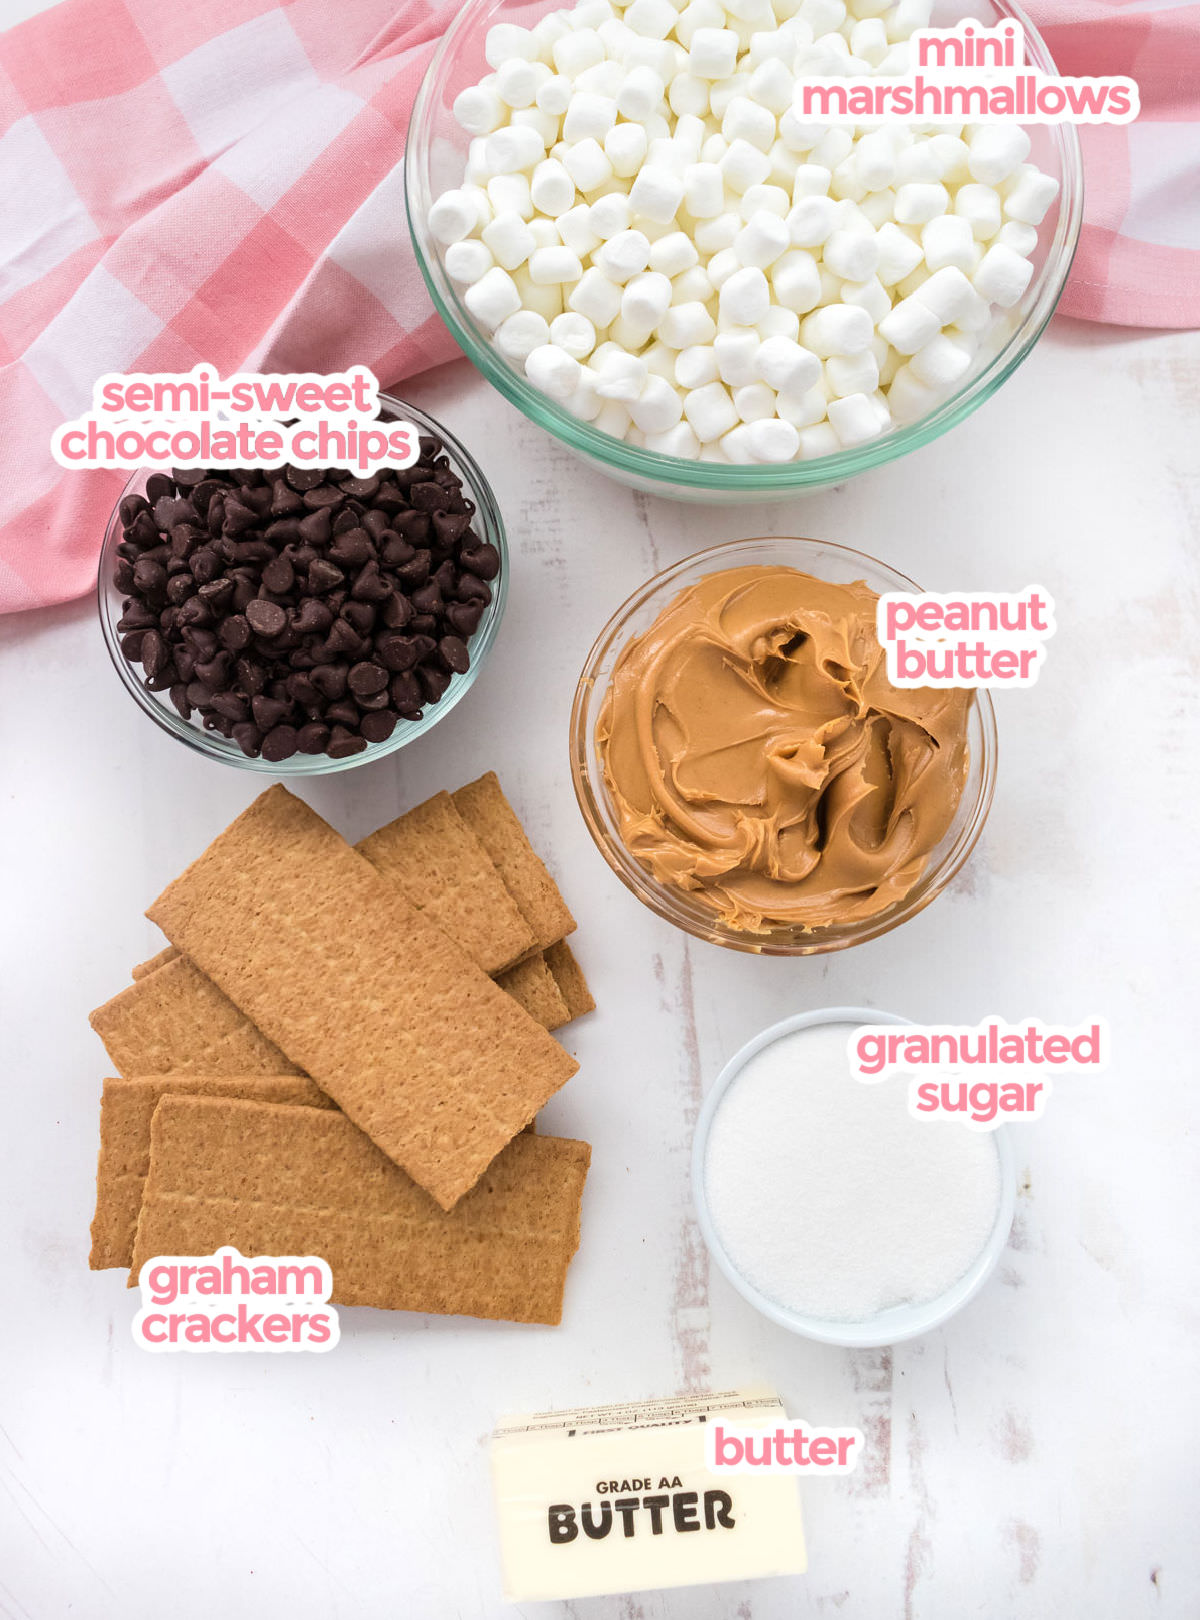 All the ingredients you will need to make Chocolate Marshmallow Bars including Mini Marshmallows, Chocolate Chips, Peanut Butter, Graham Crackers, Butter and Sugar.